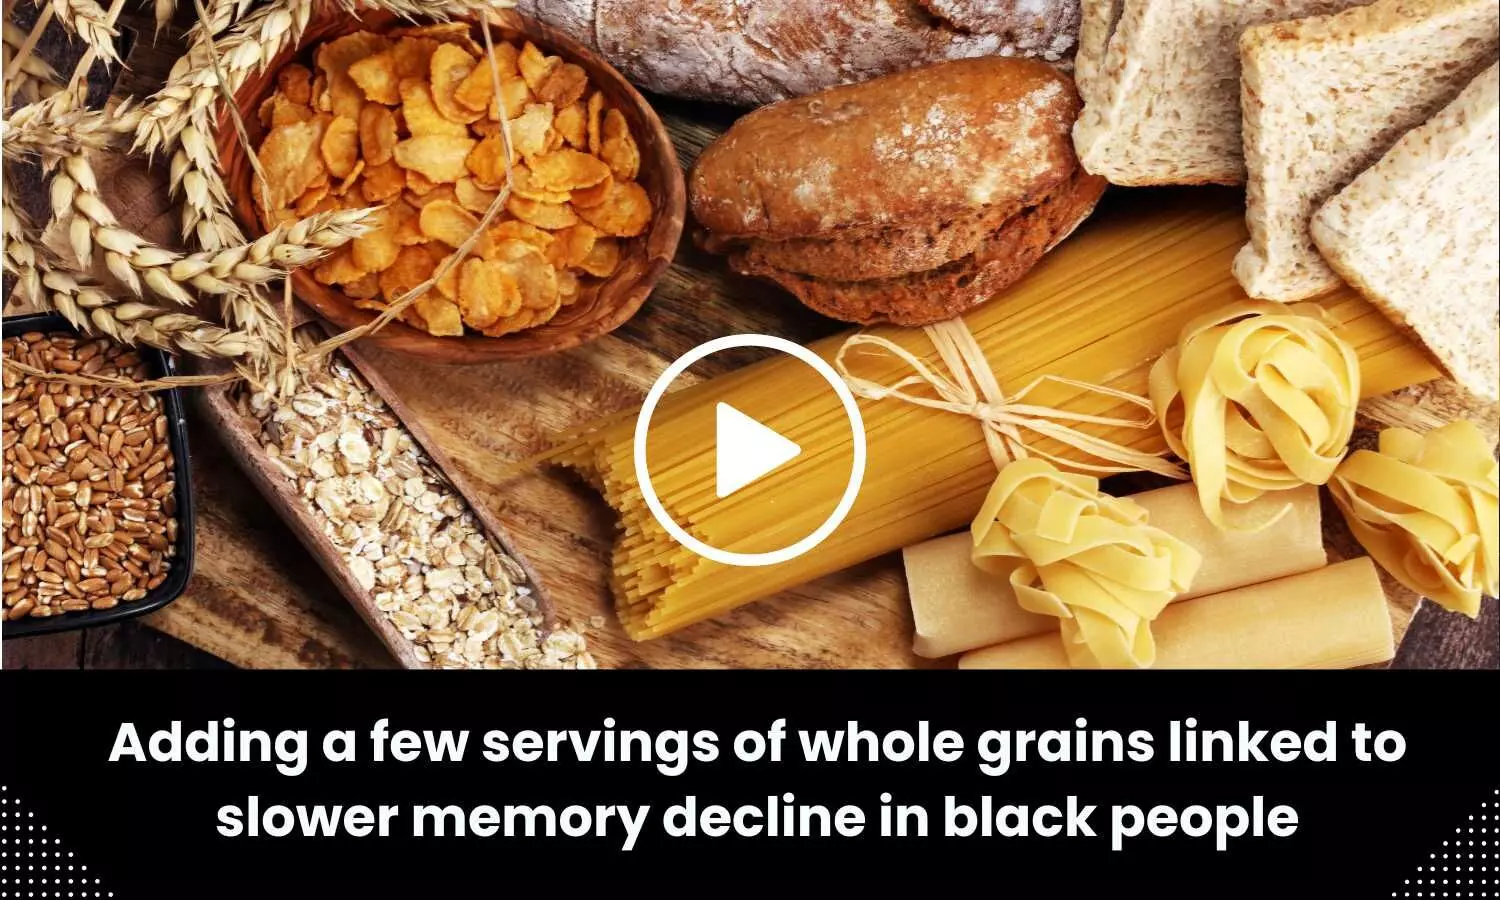 Adding a few servings of whole grains linked to slower memory decline in black people